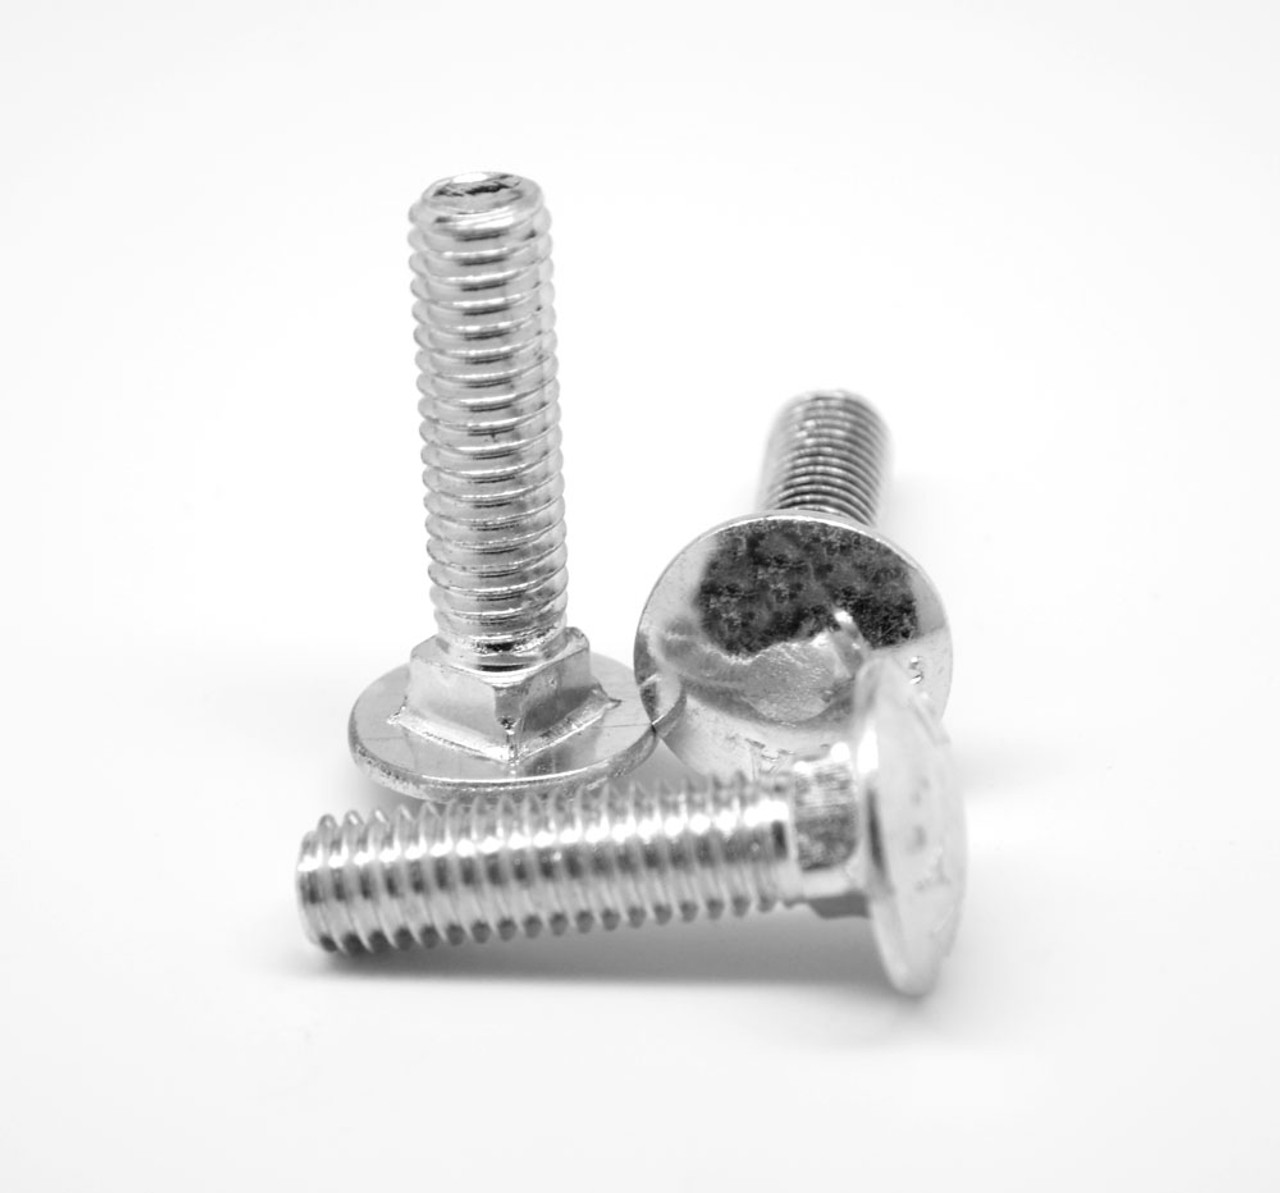 5/8-11 x 8 1/2 Coarse Thread Grade A Carriage Bolt Low Carbon Steel Zinc Plated